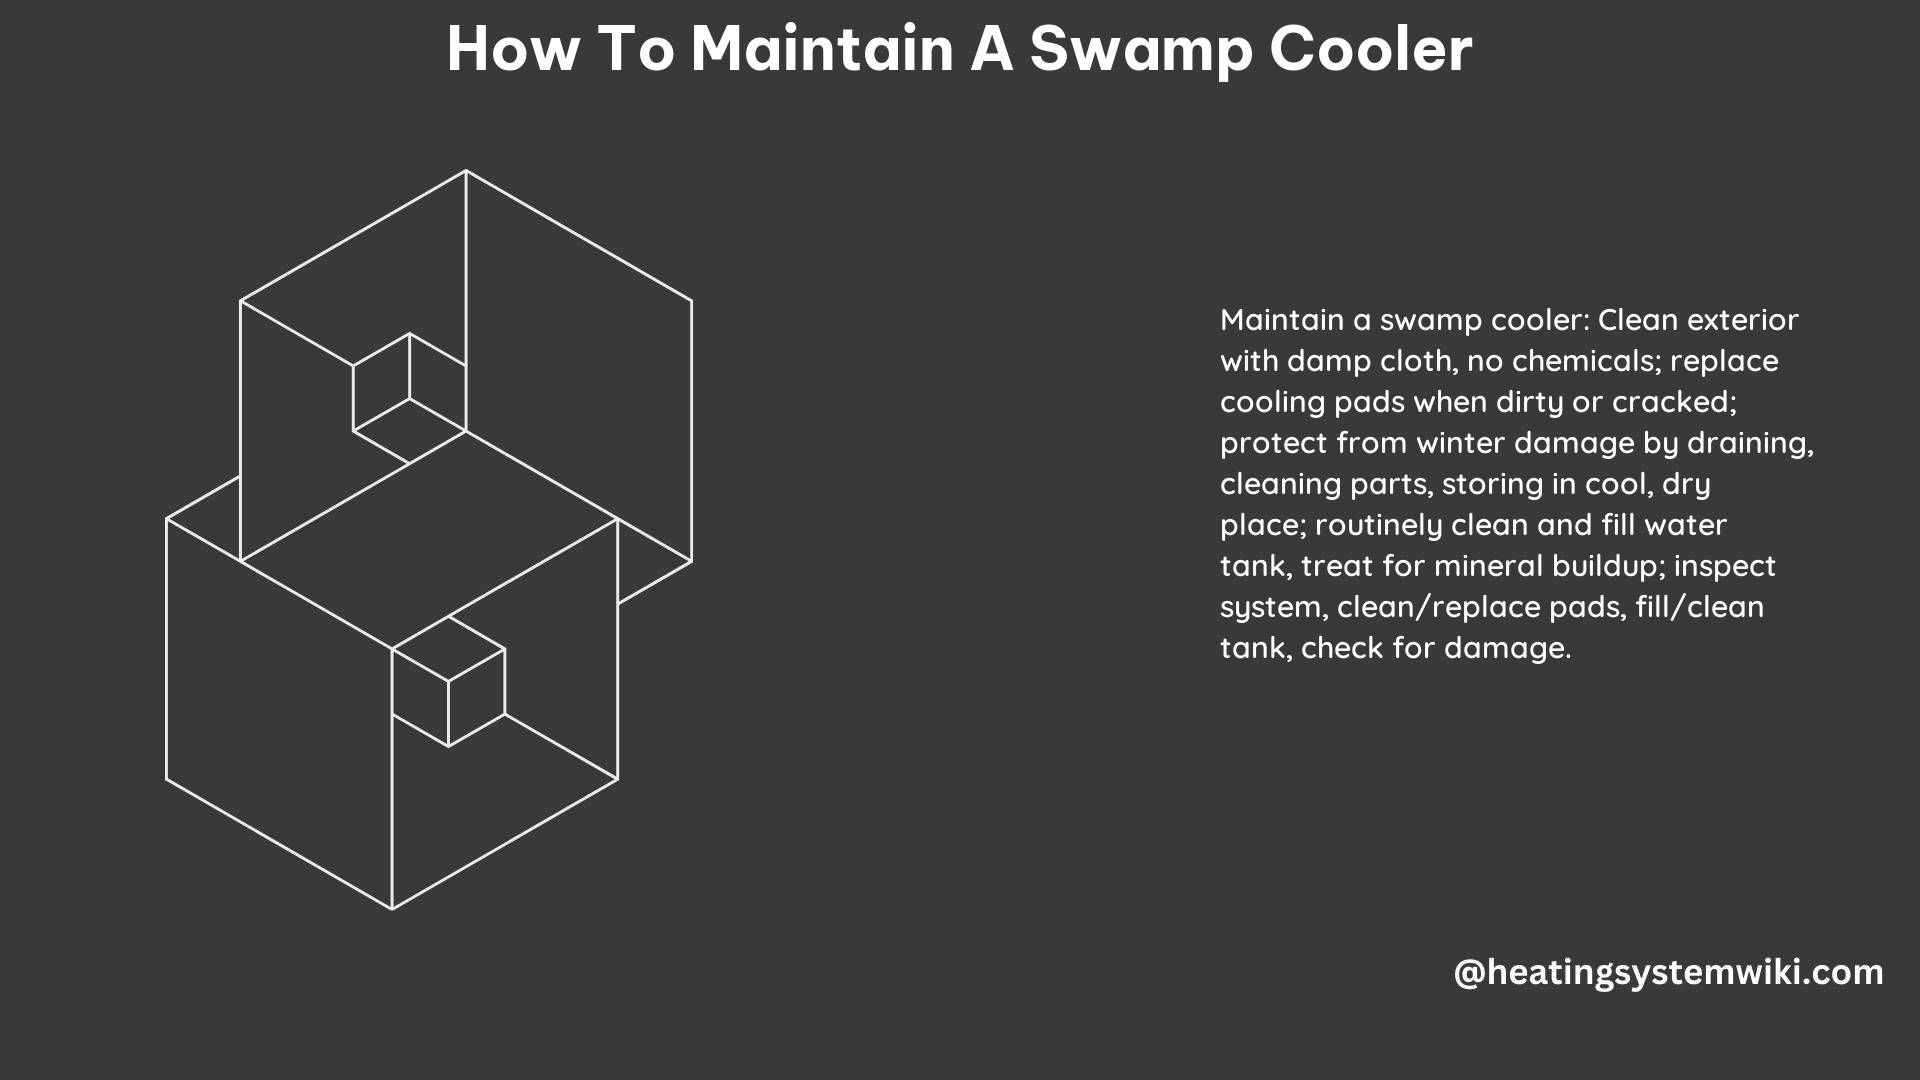 How to Maintain a Swamp Cooler